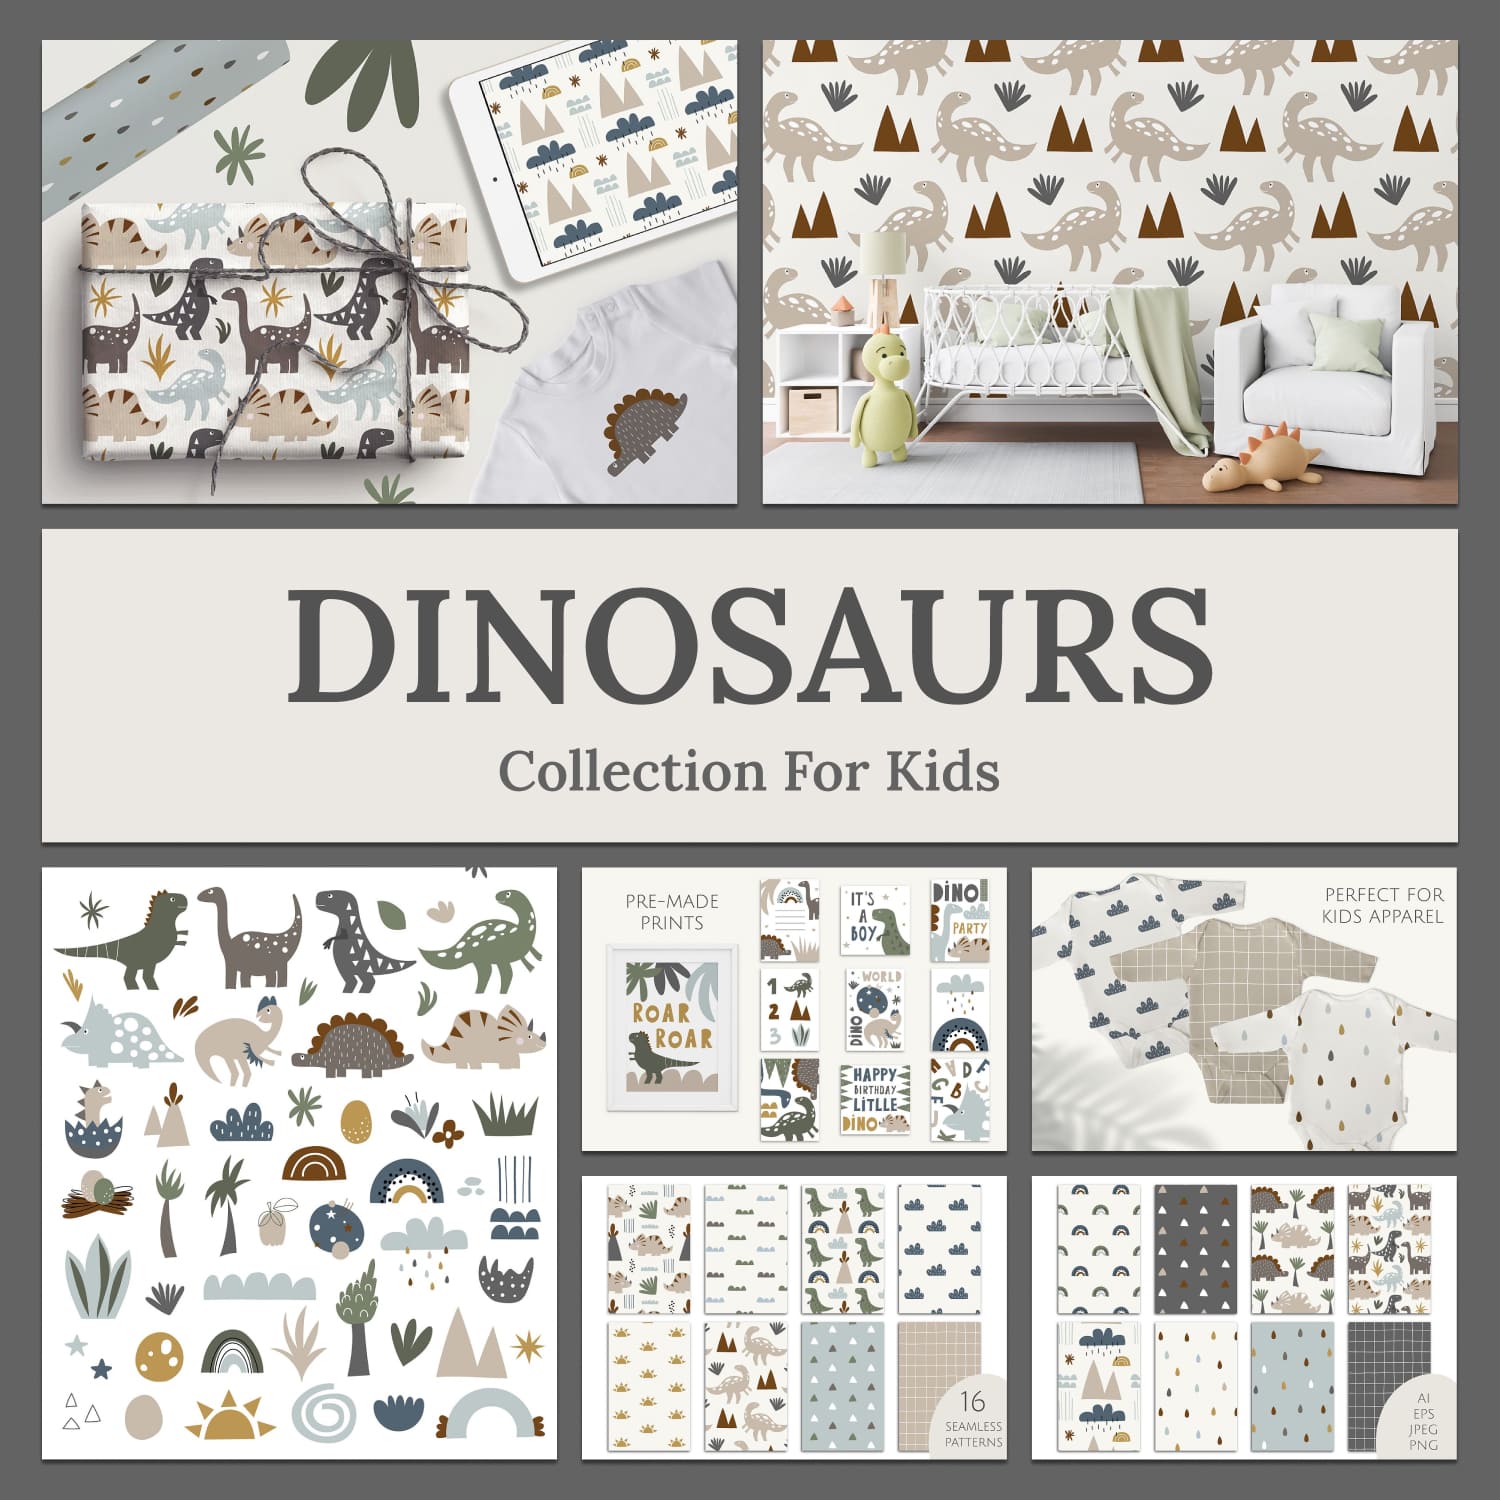 Dinosaurs. Modern Clipart Collection For Kids cover image.